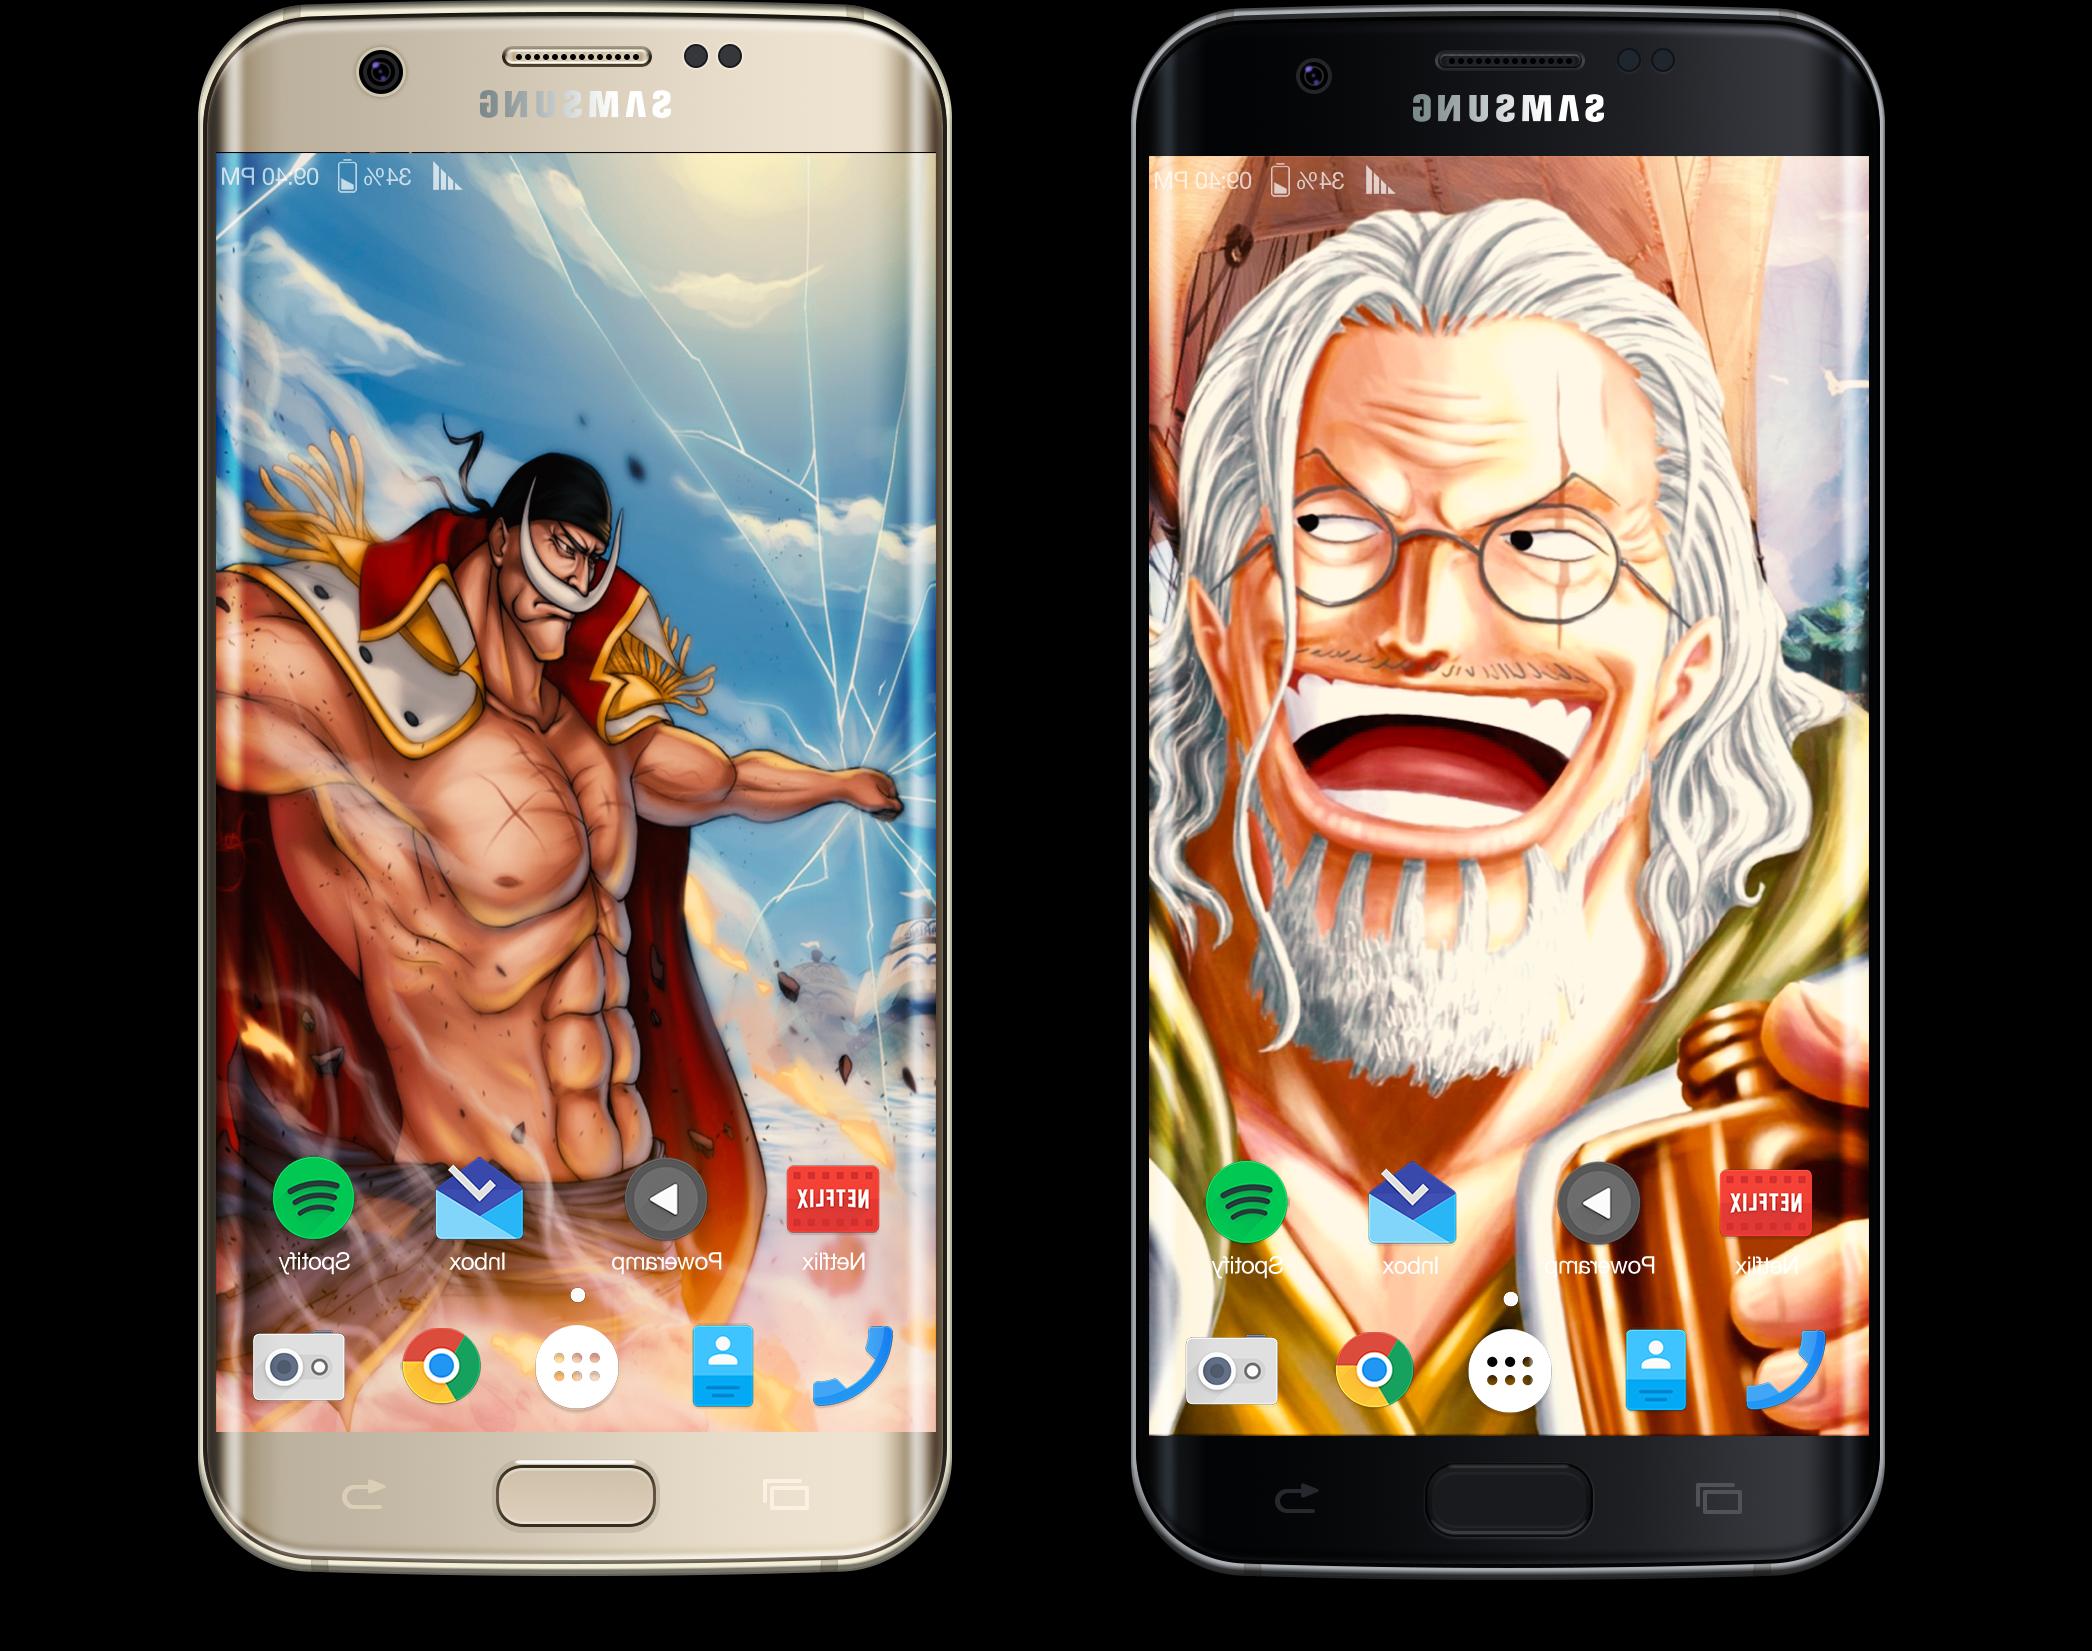 Cool One Piece Wallpapers 4k For Android Apk Download